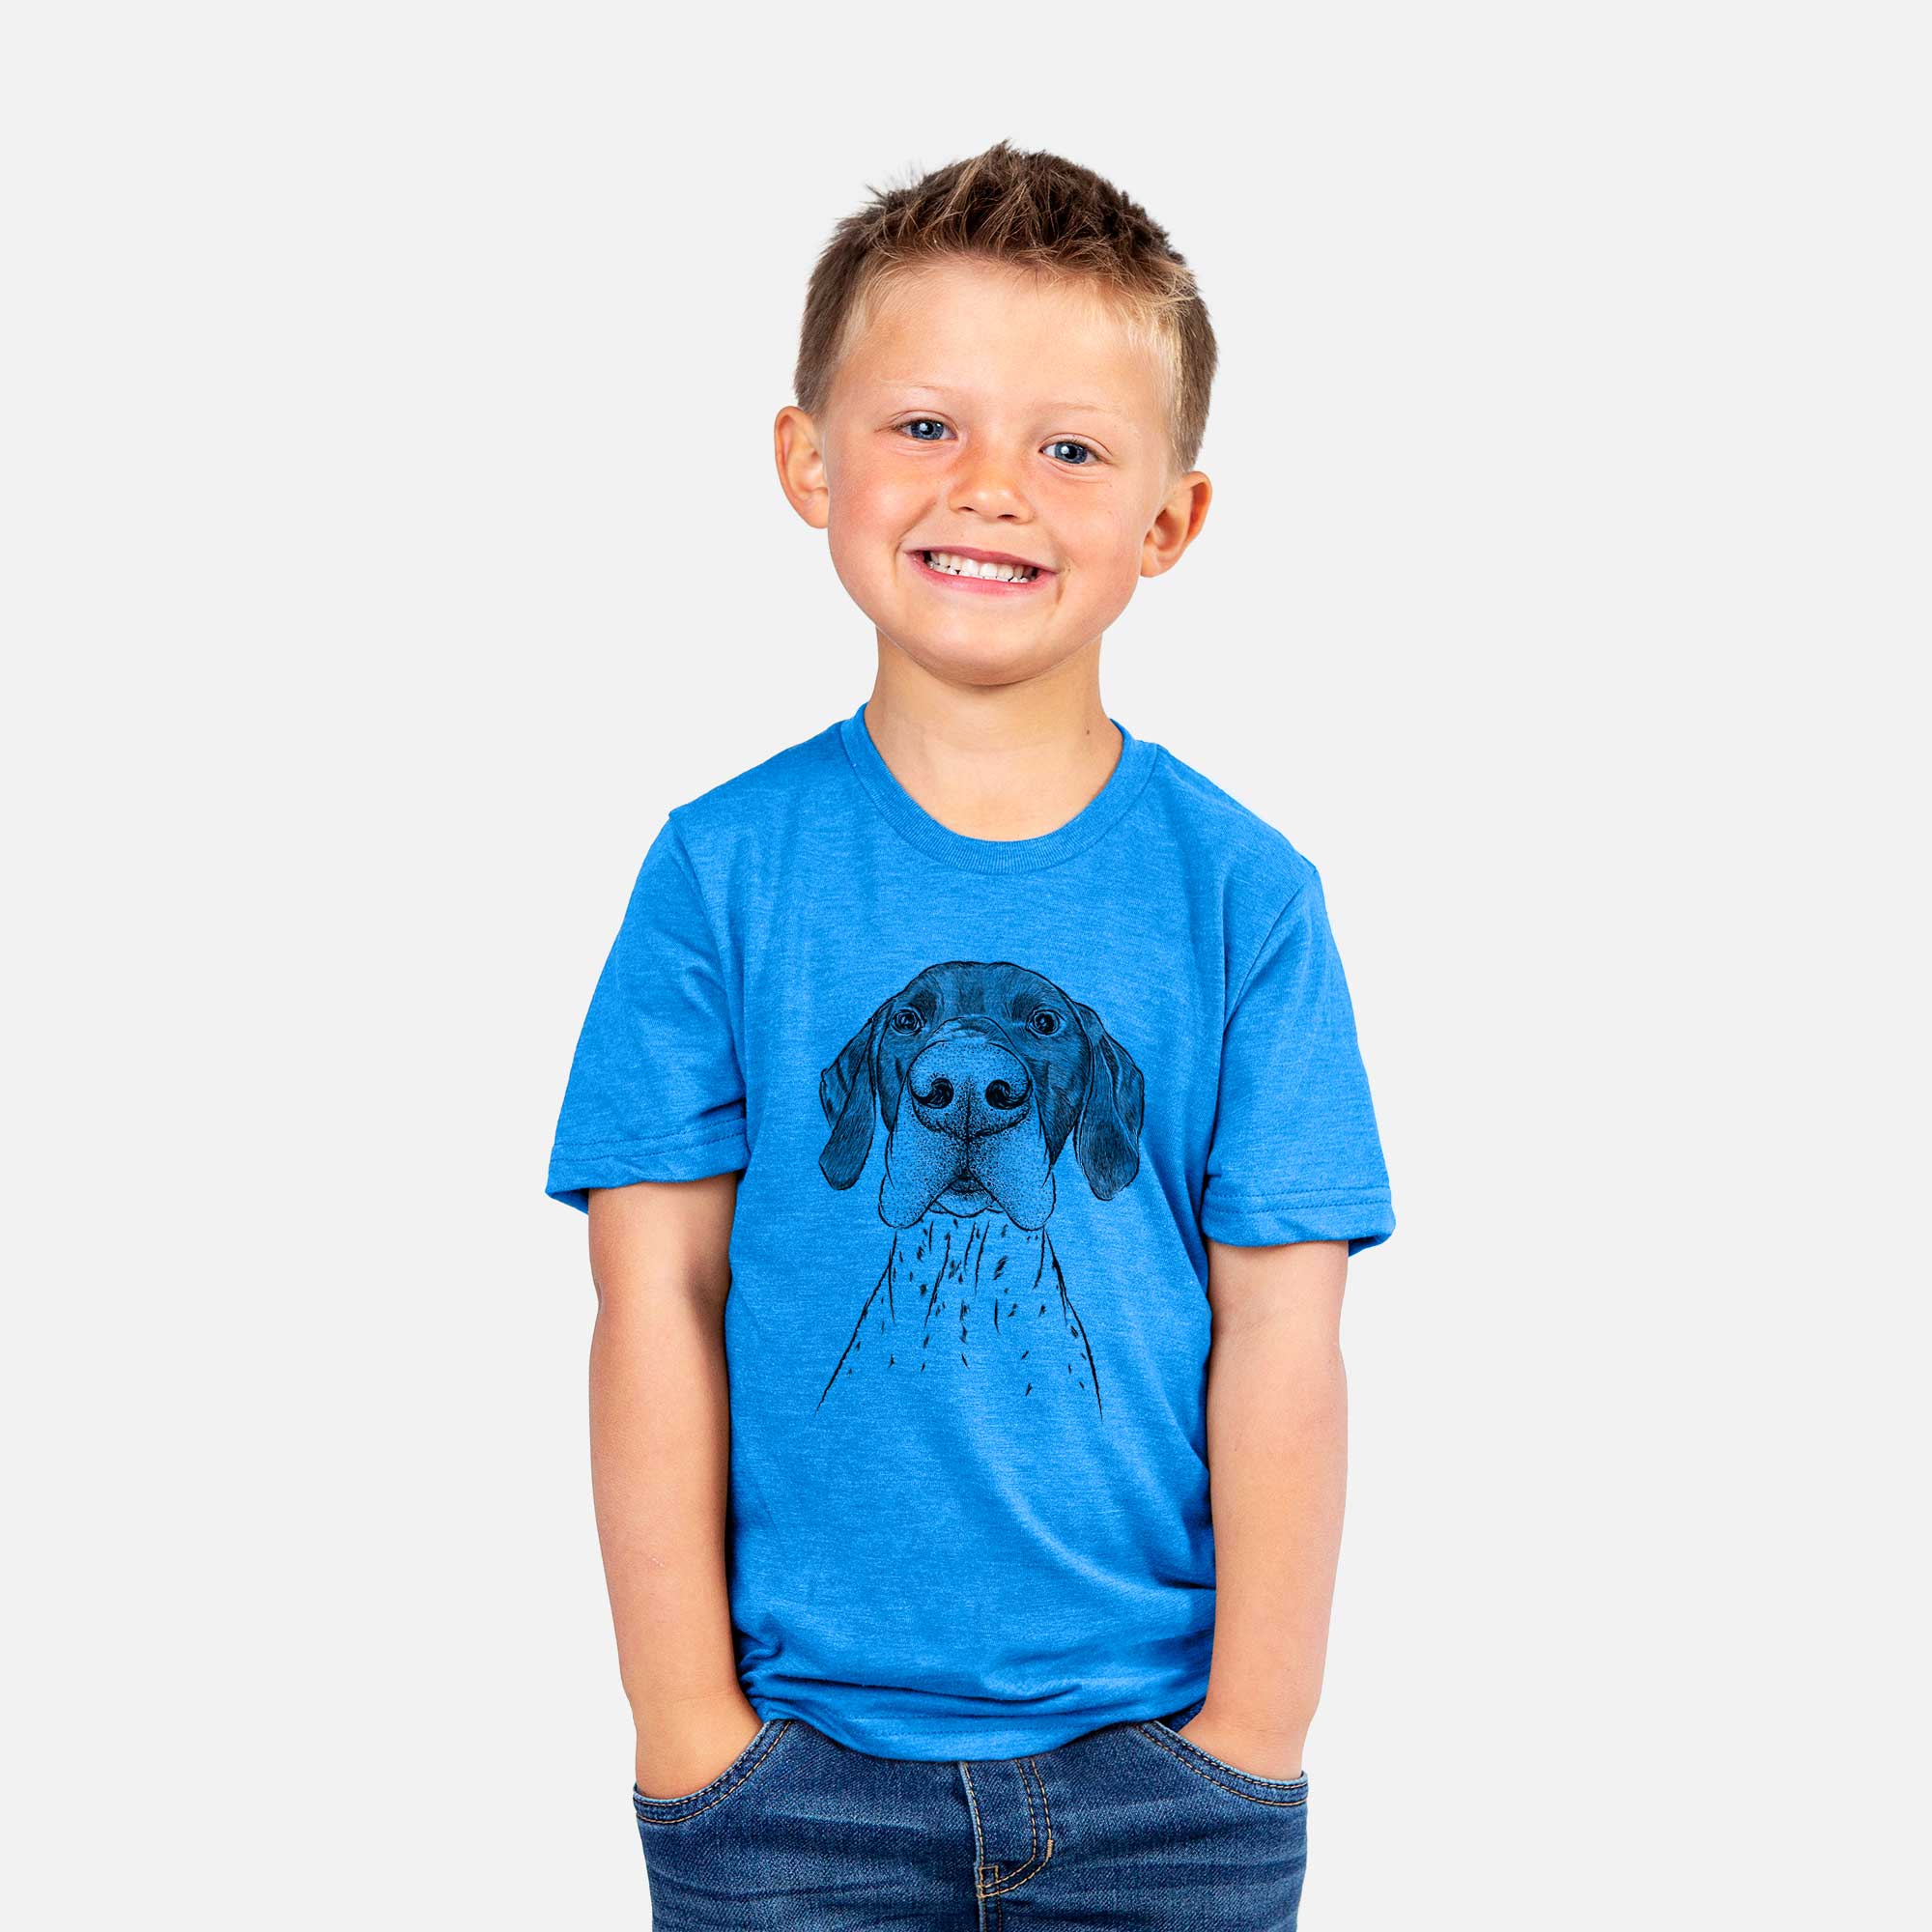 Bare Booze the German Shorthaired Pointer - Kids/Youth/Toddler Shirt